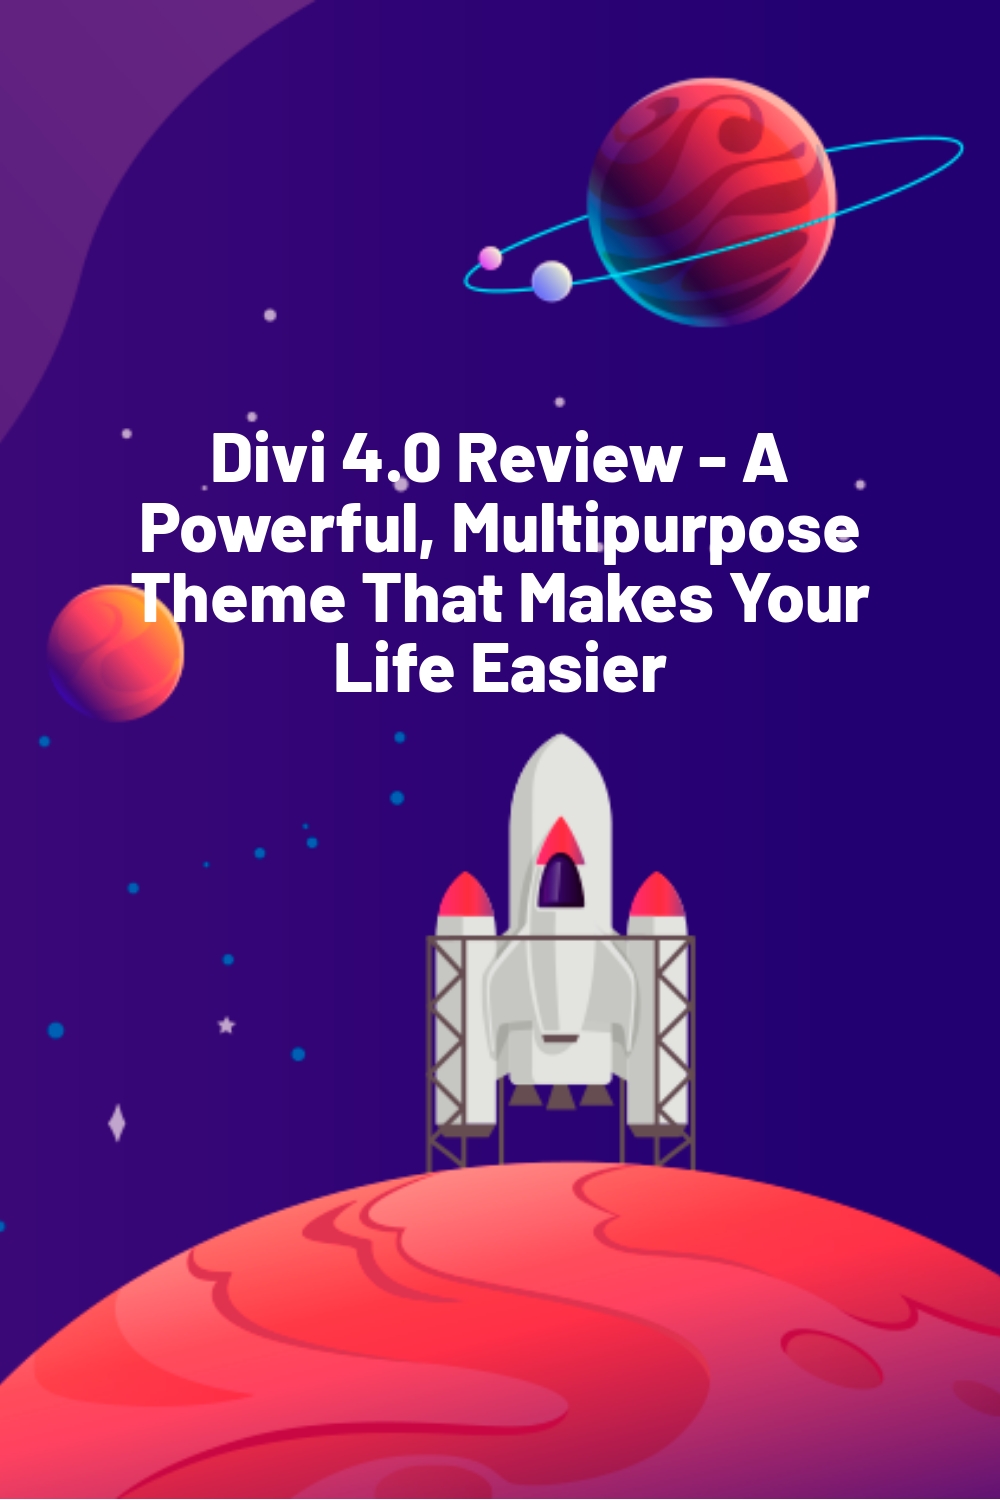 Divi 4.0 Review – A Powerful, Multipurpose Theme That Makes Your Life Easier